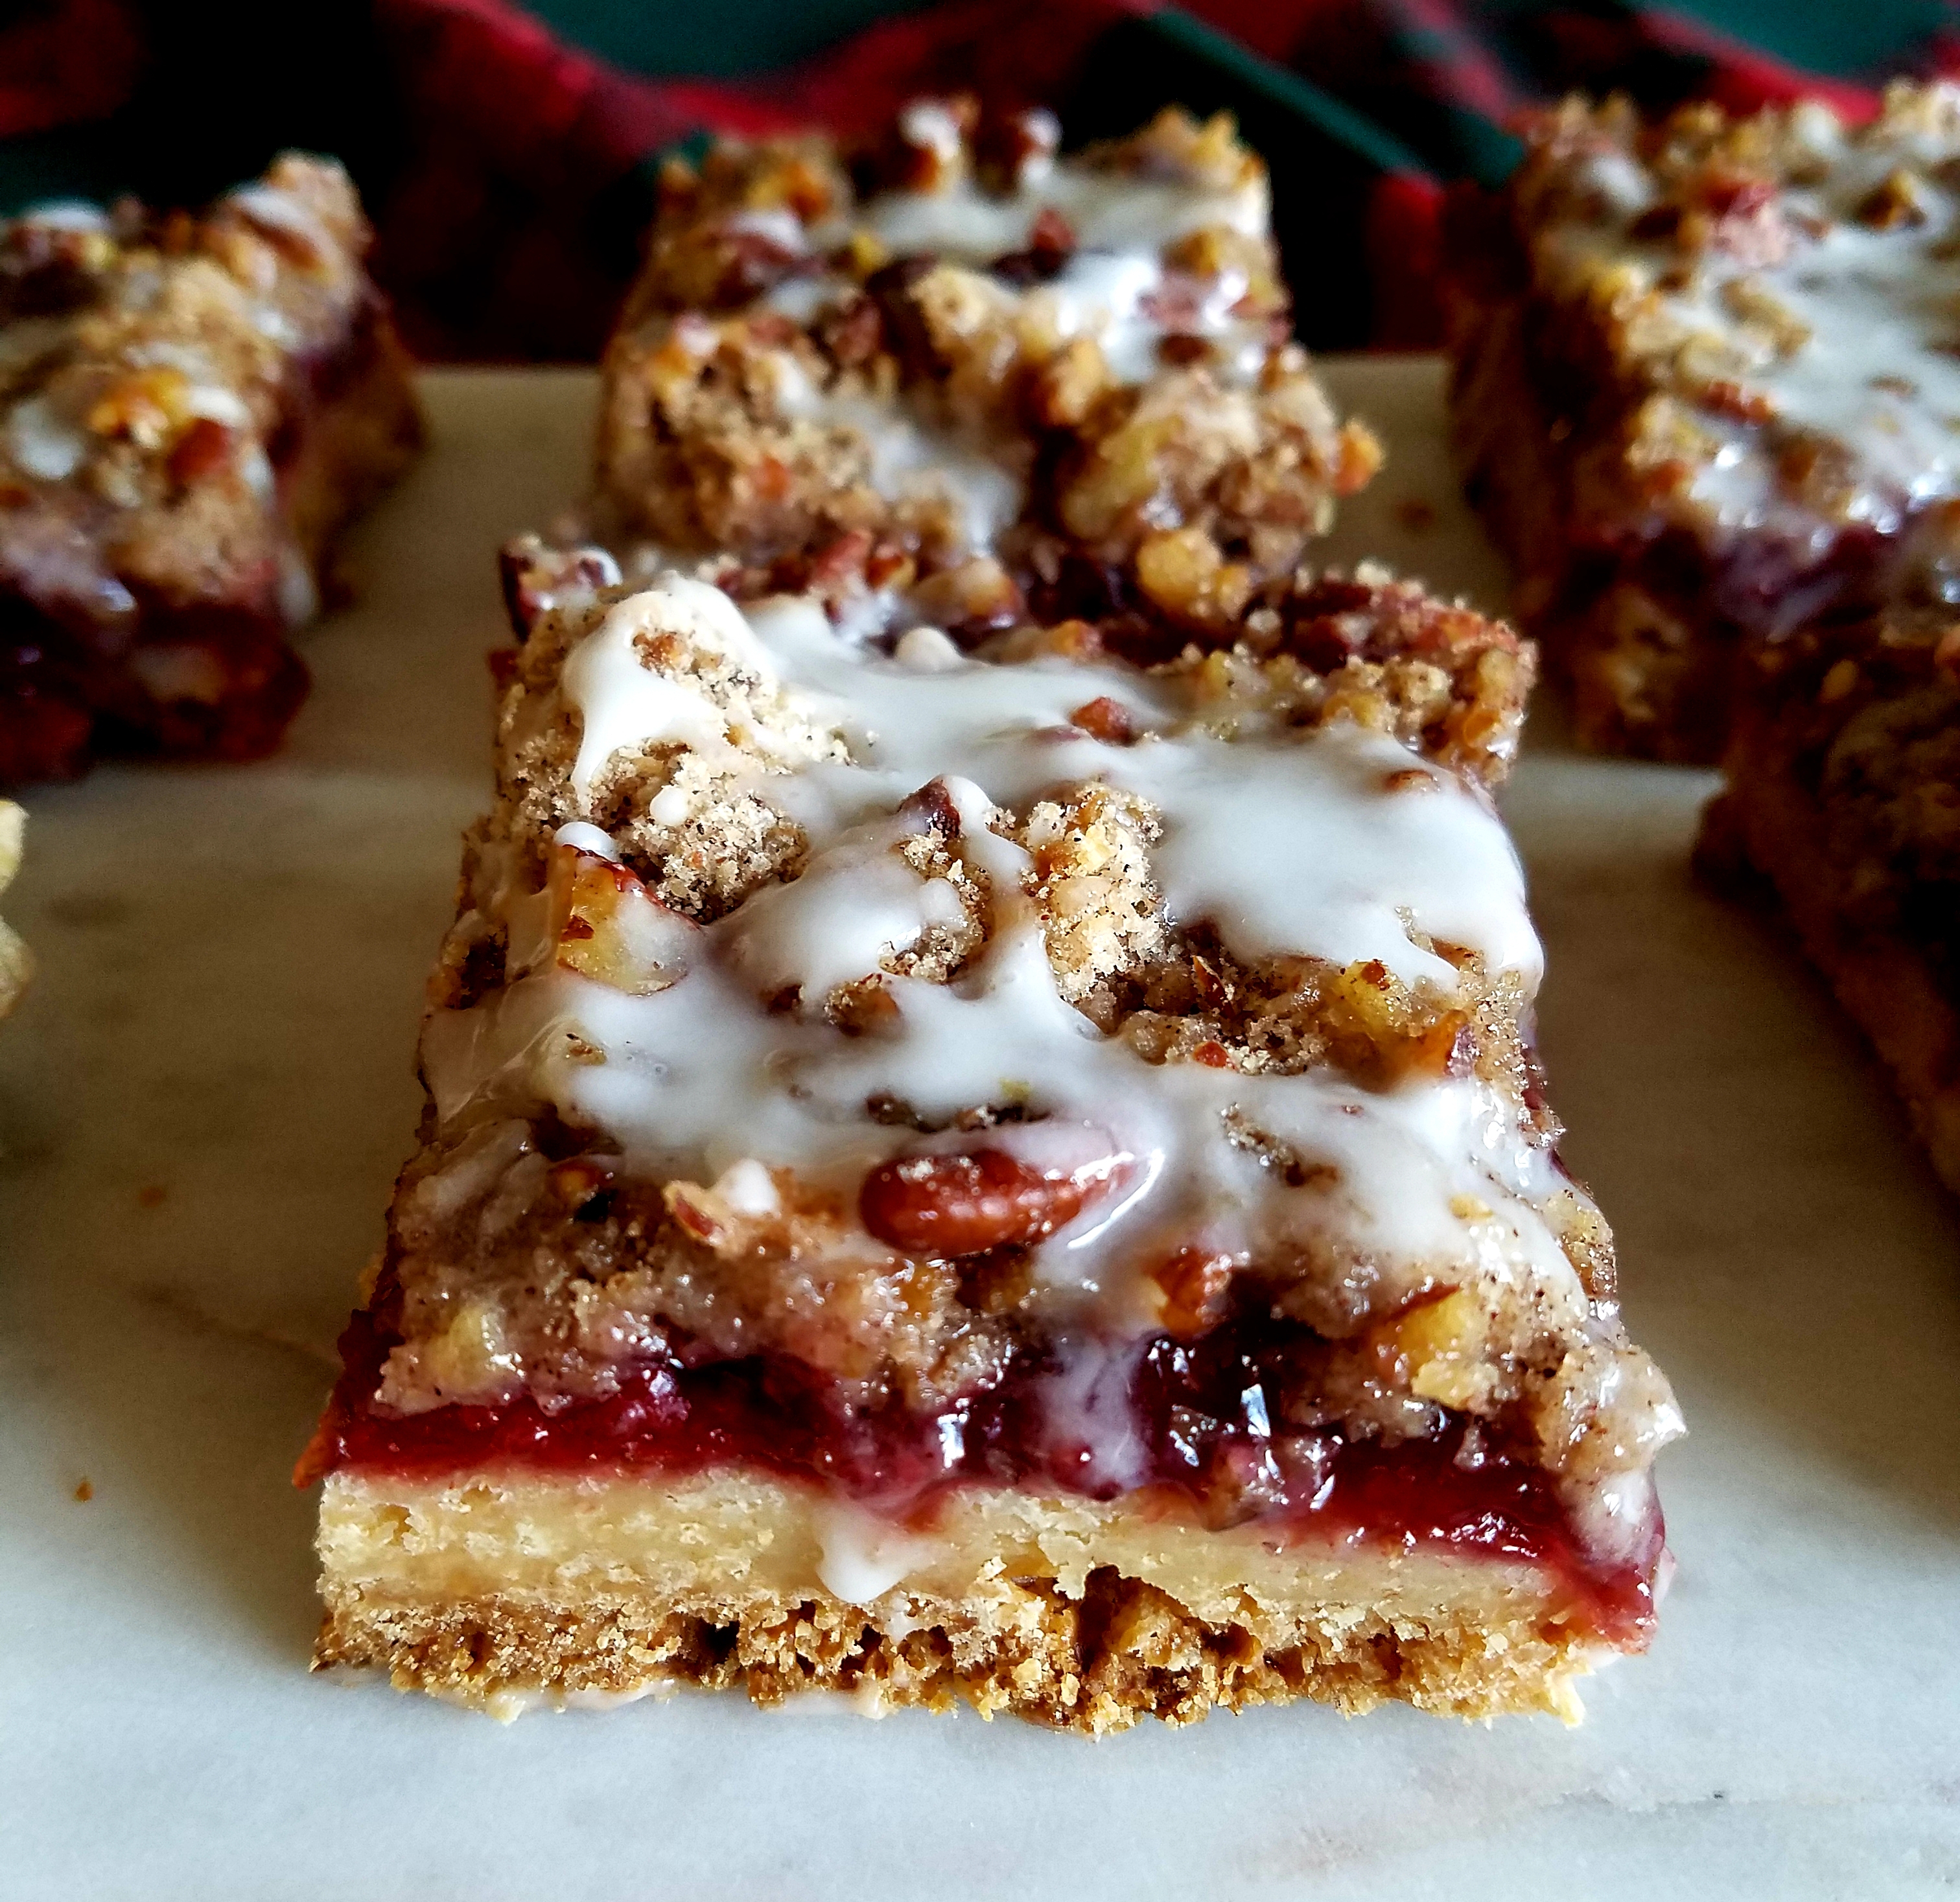 Valerie’s Cherry Pie Bars (Recipe Inspired by FROM THE KITCHEN OF HALF TRUTH)